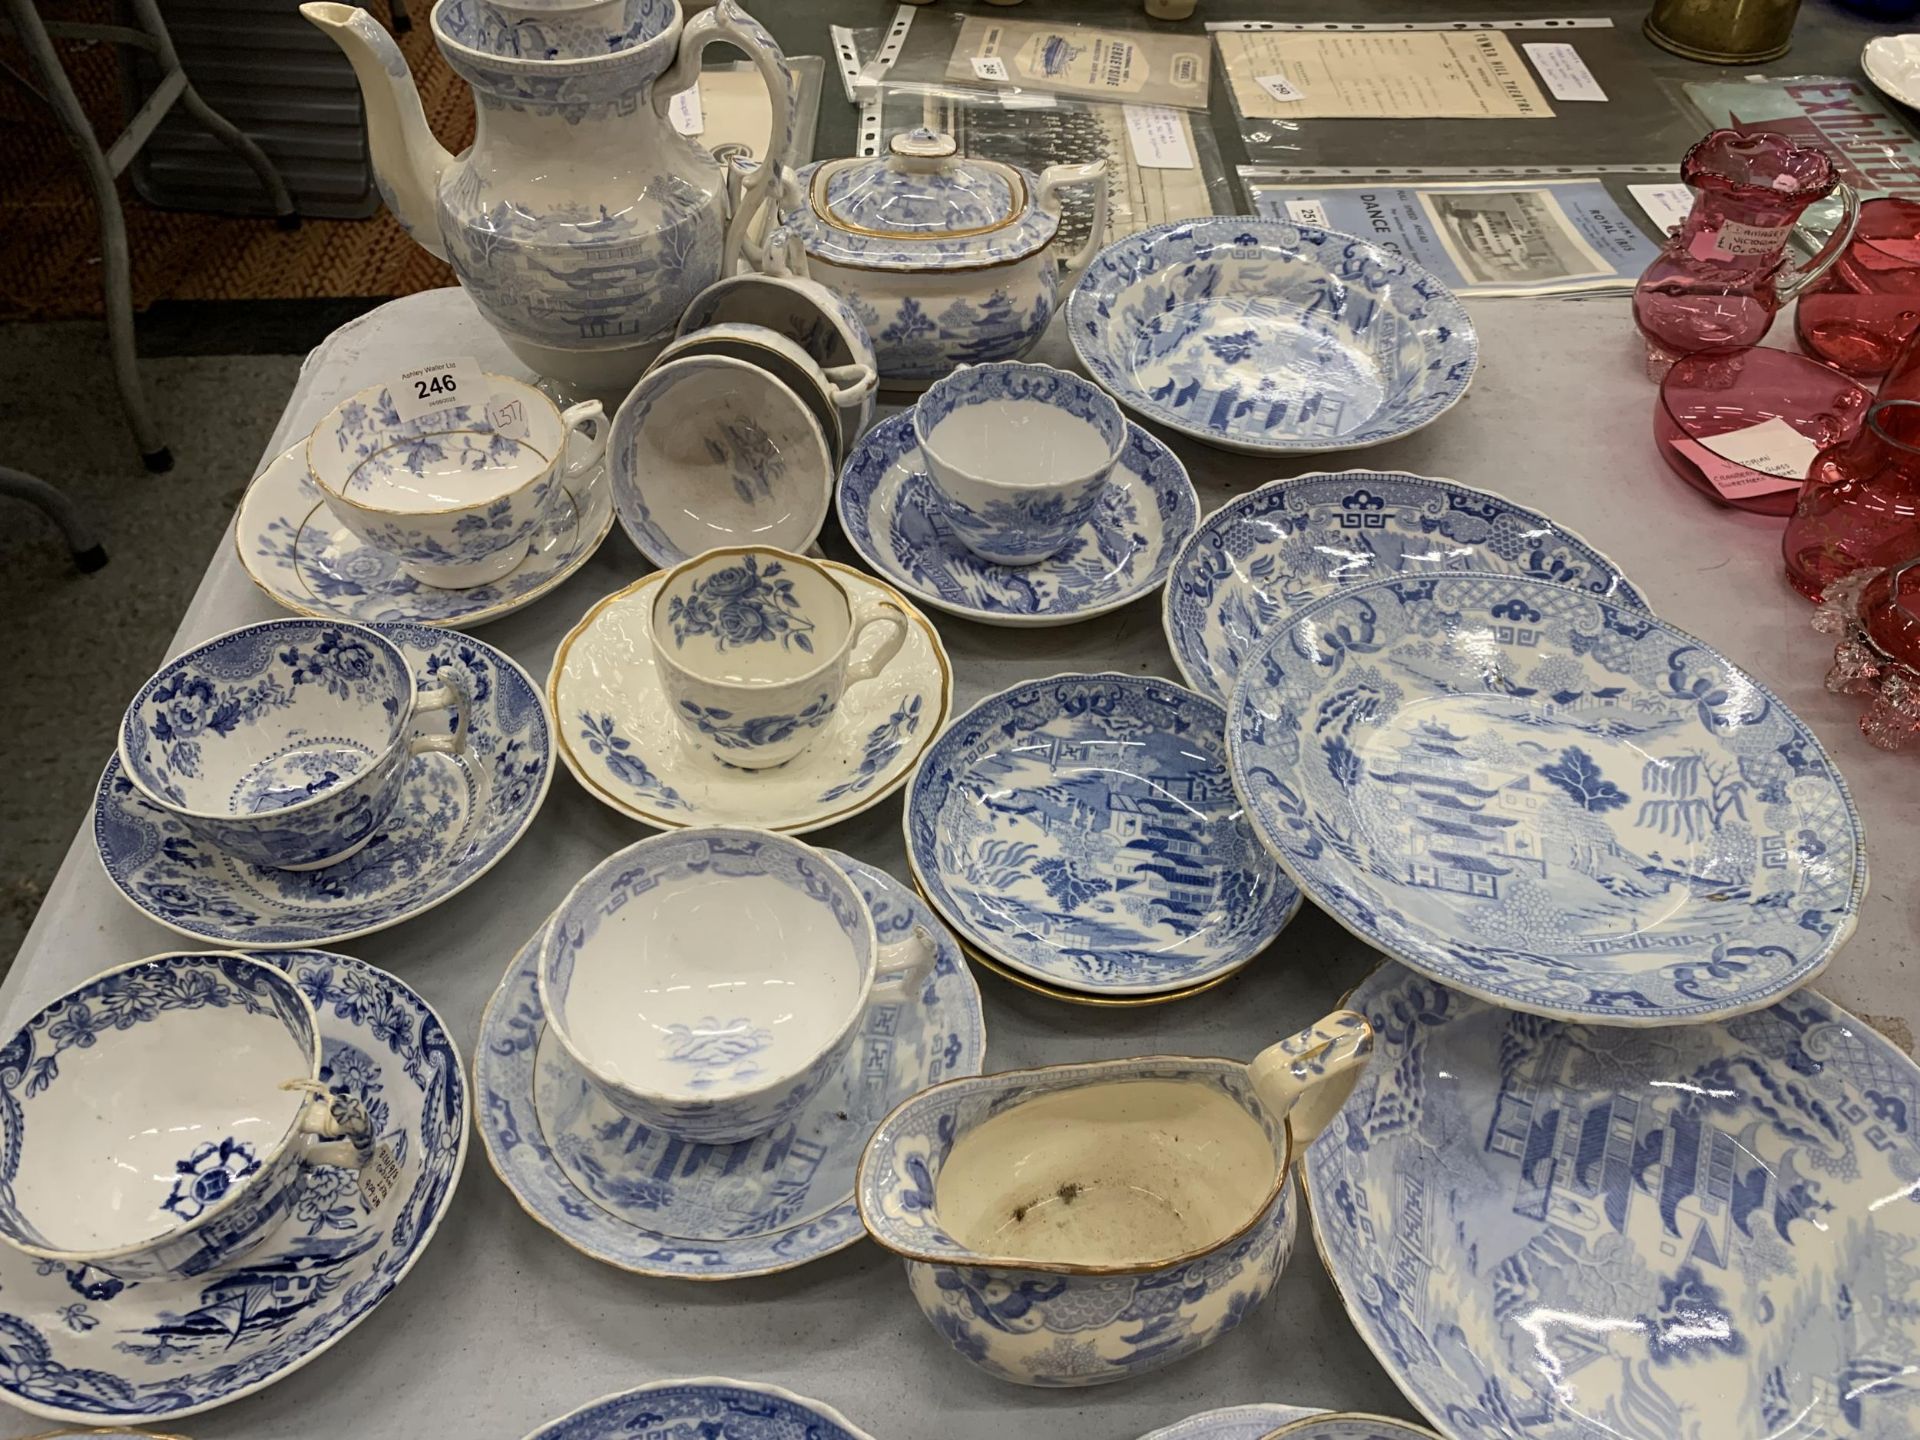 A LARGE COLLECTION OF 19TH CENTURY BLUE AND WHITE TEA WARES, TEAPOT, CUPS, SAUCERS ETC - Image 3 of 6